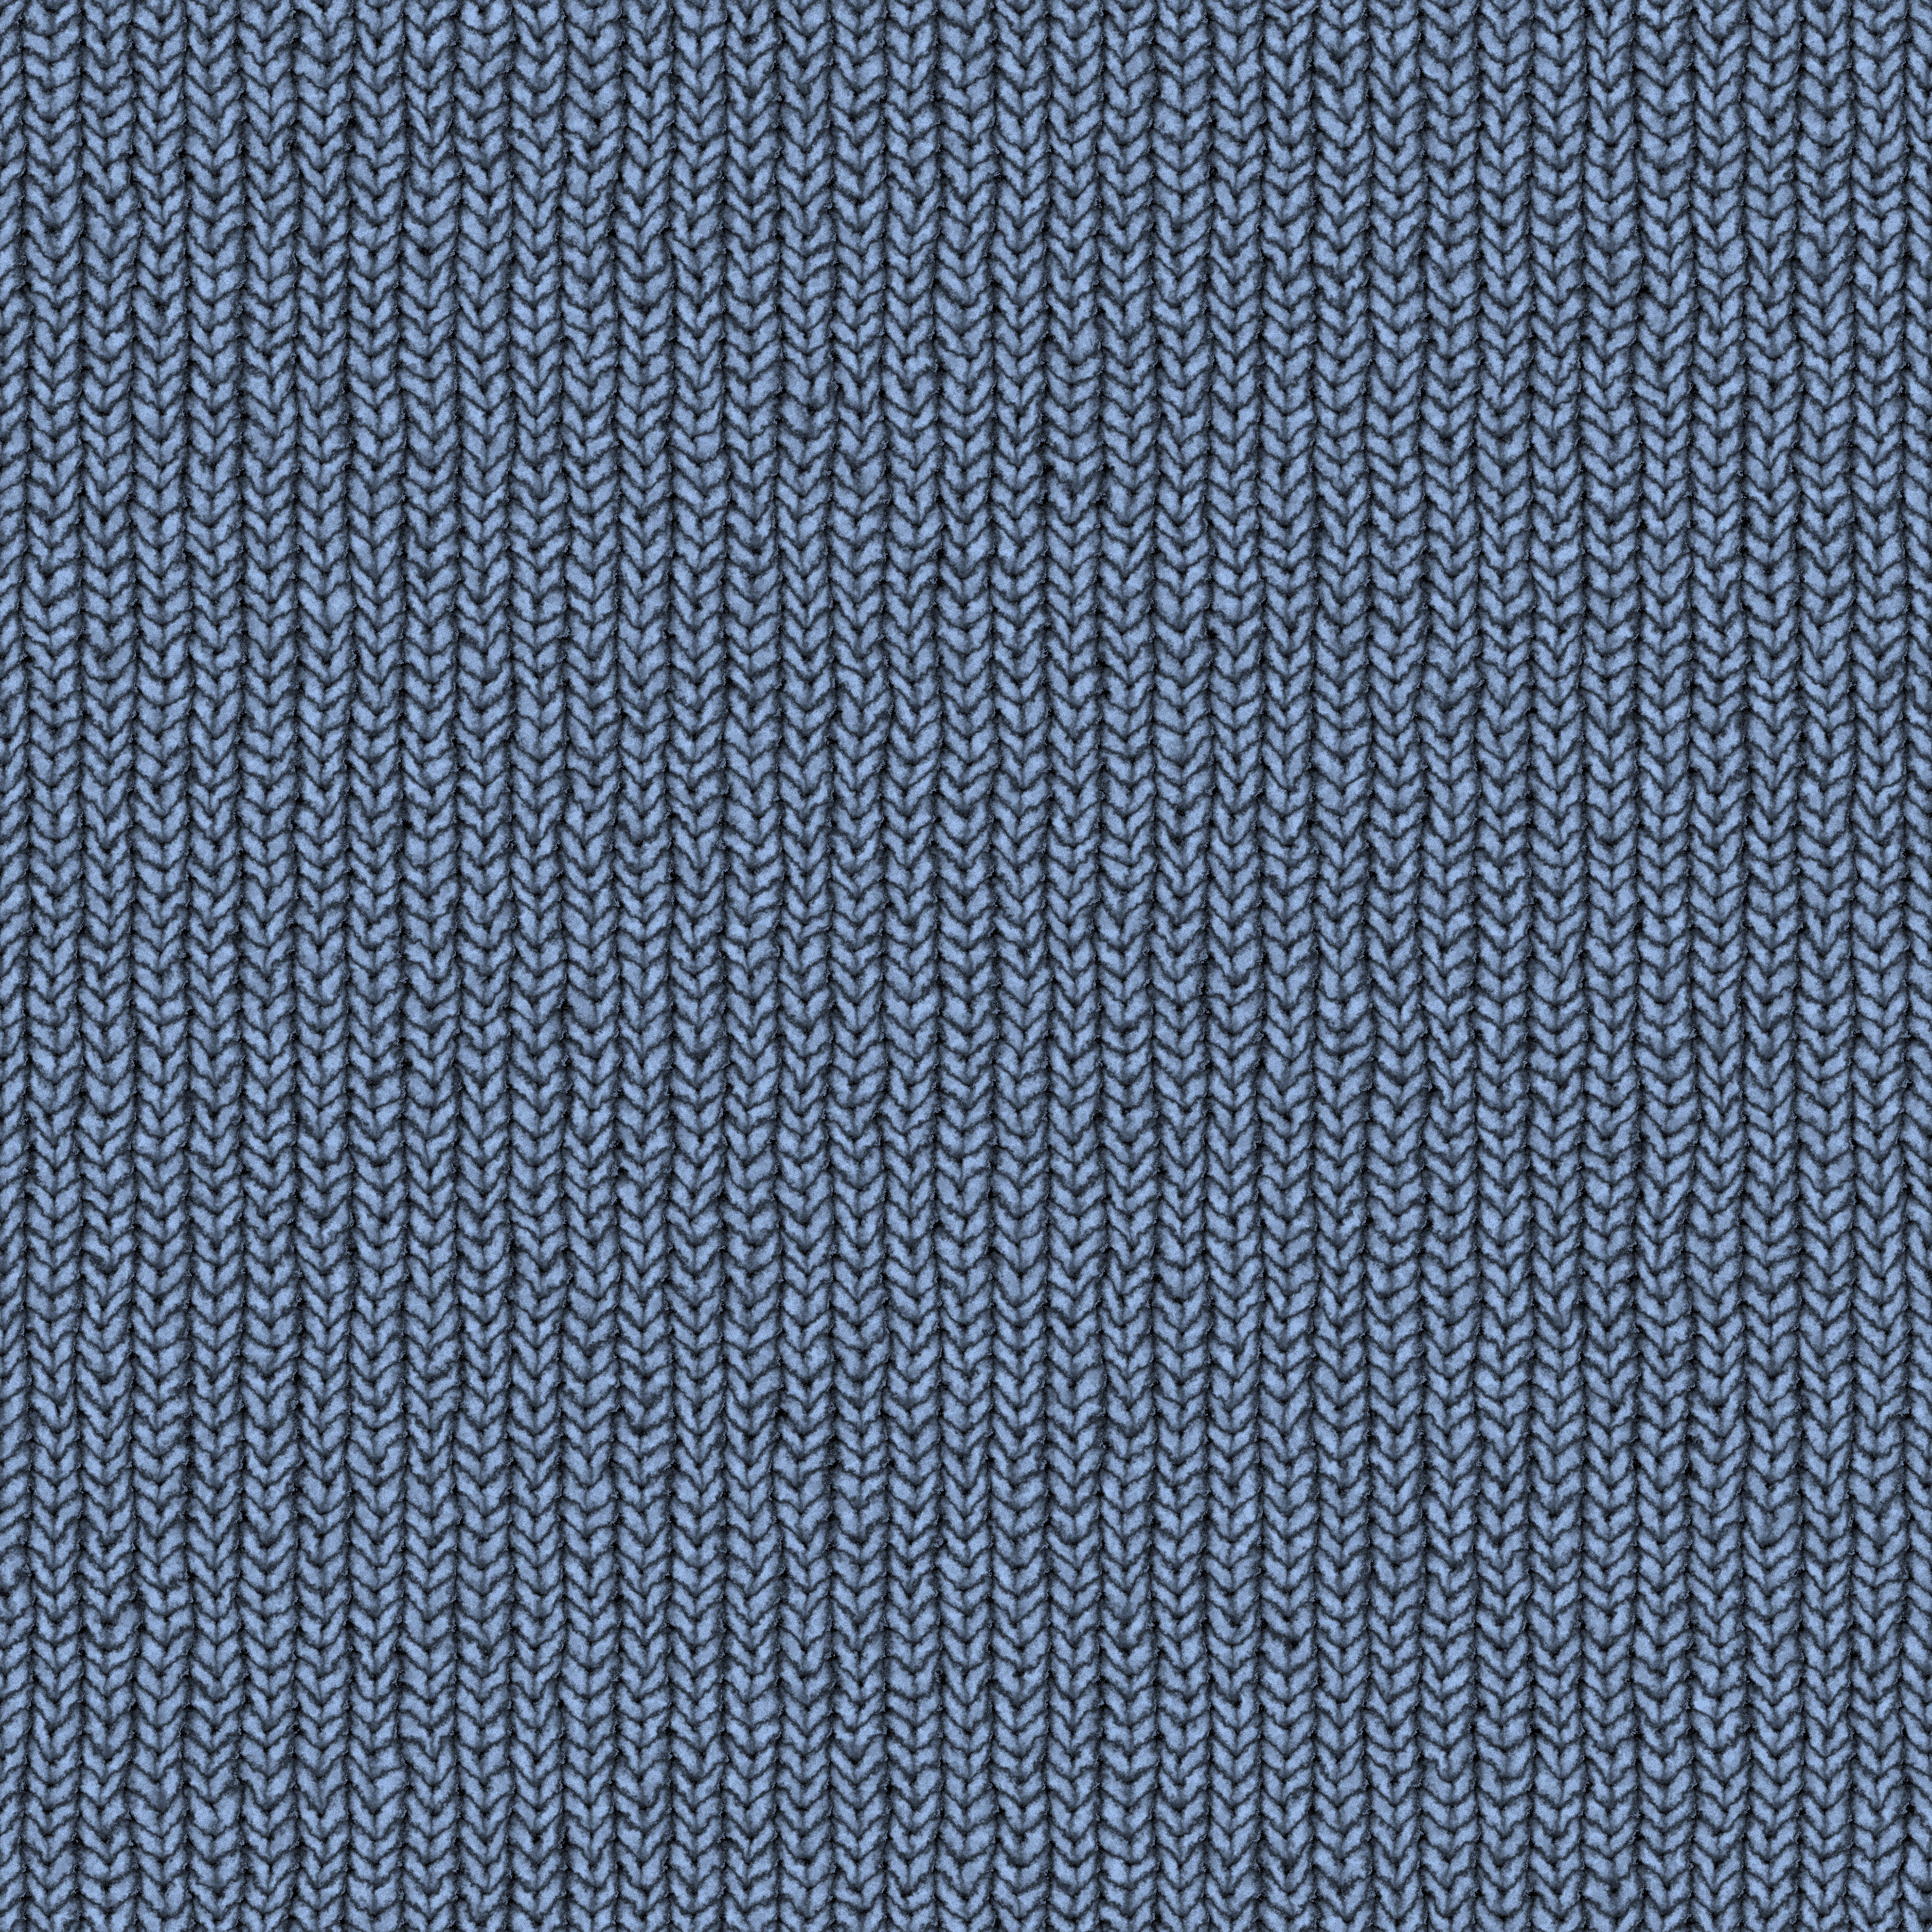 fabric texture of knitted wool as blue background